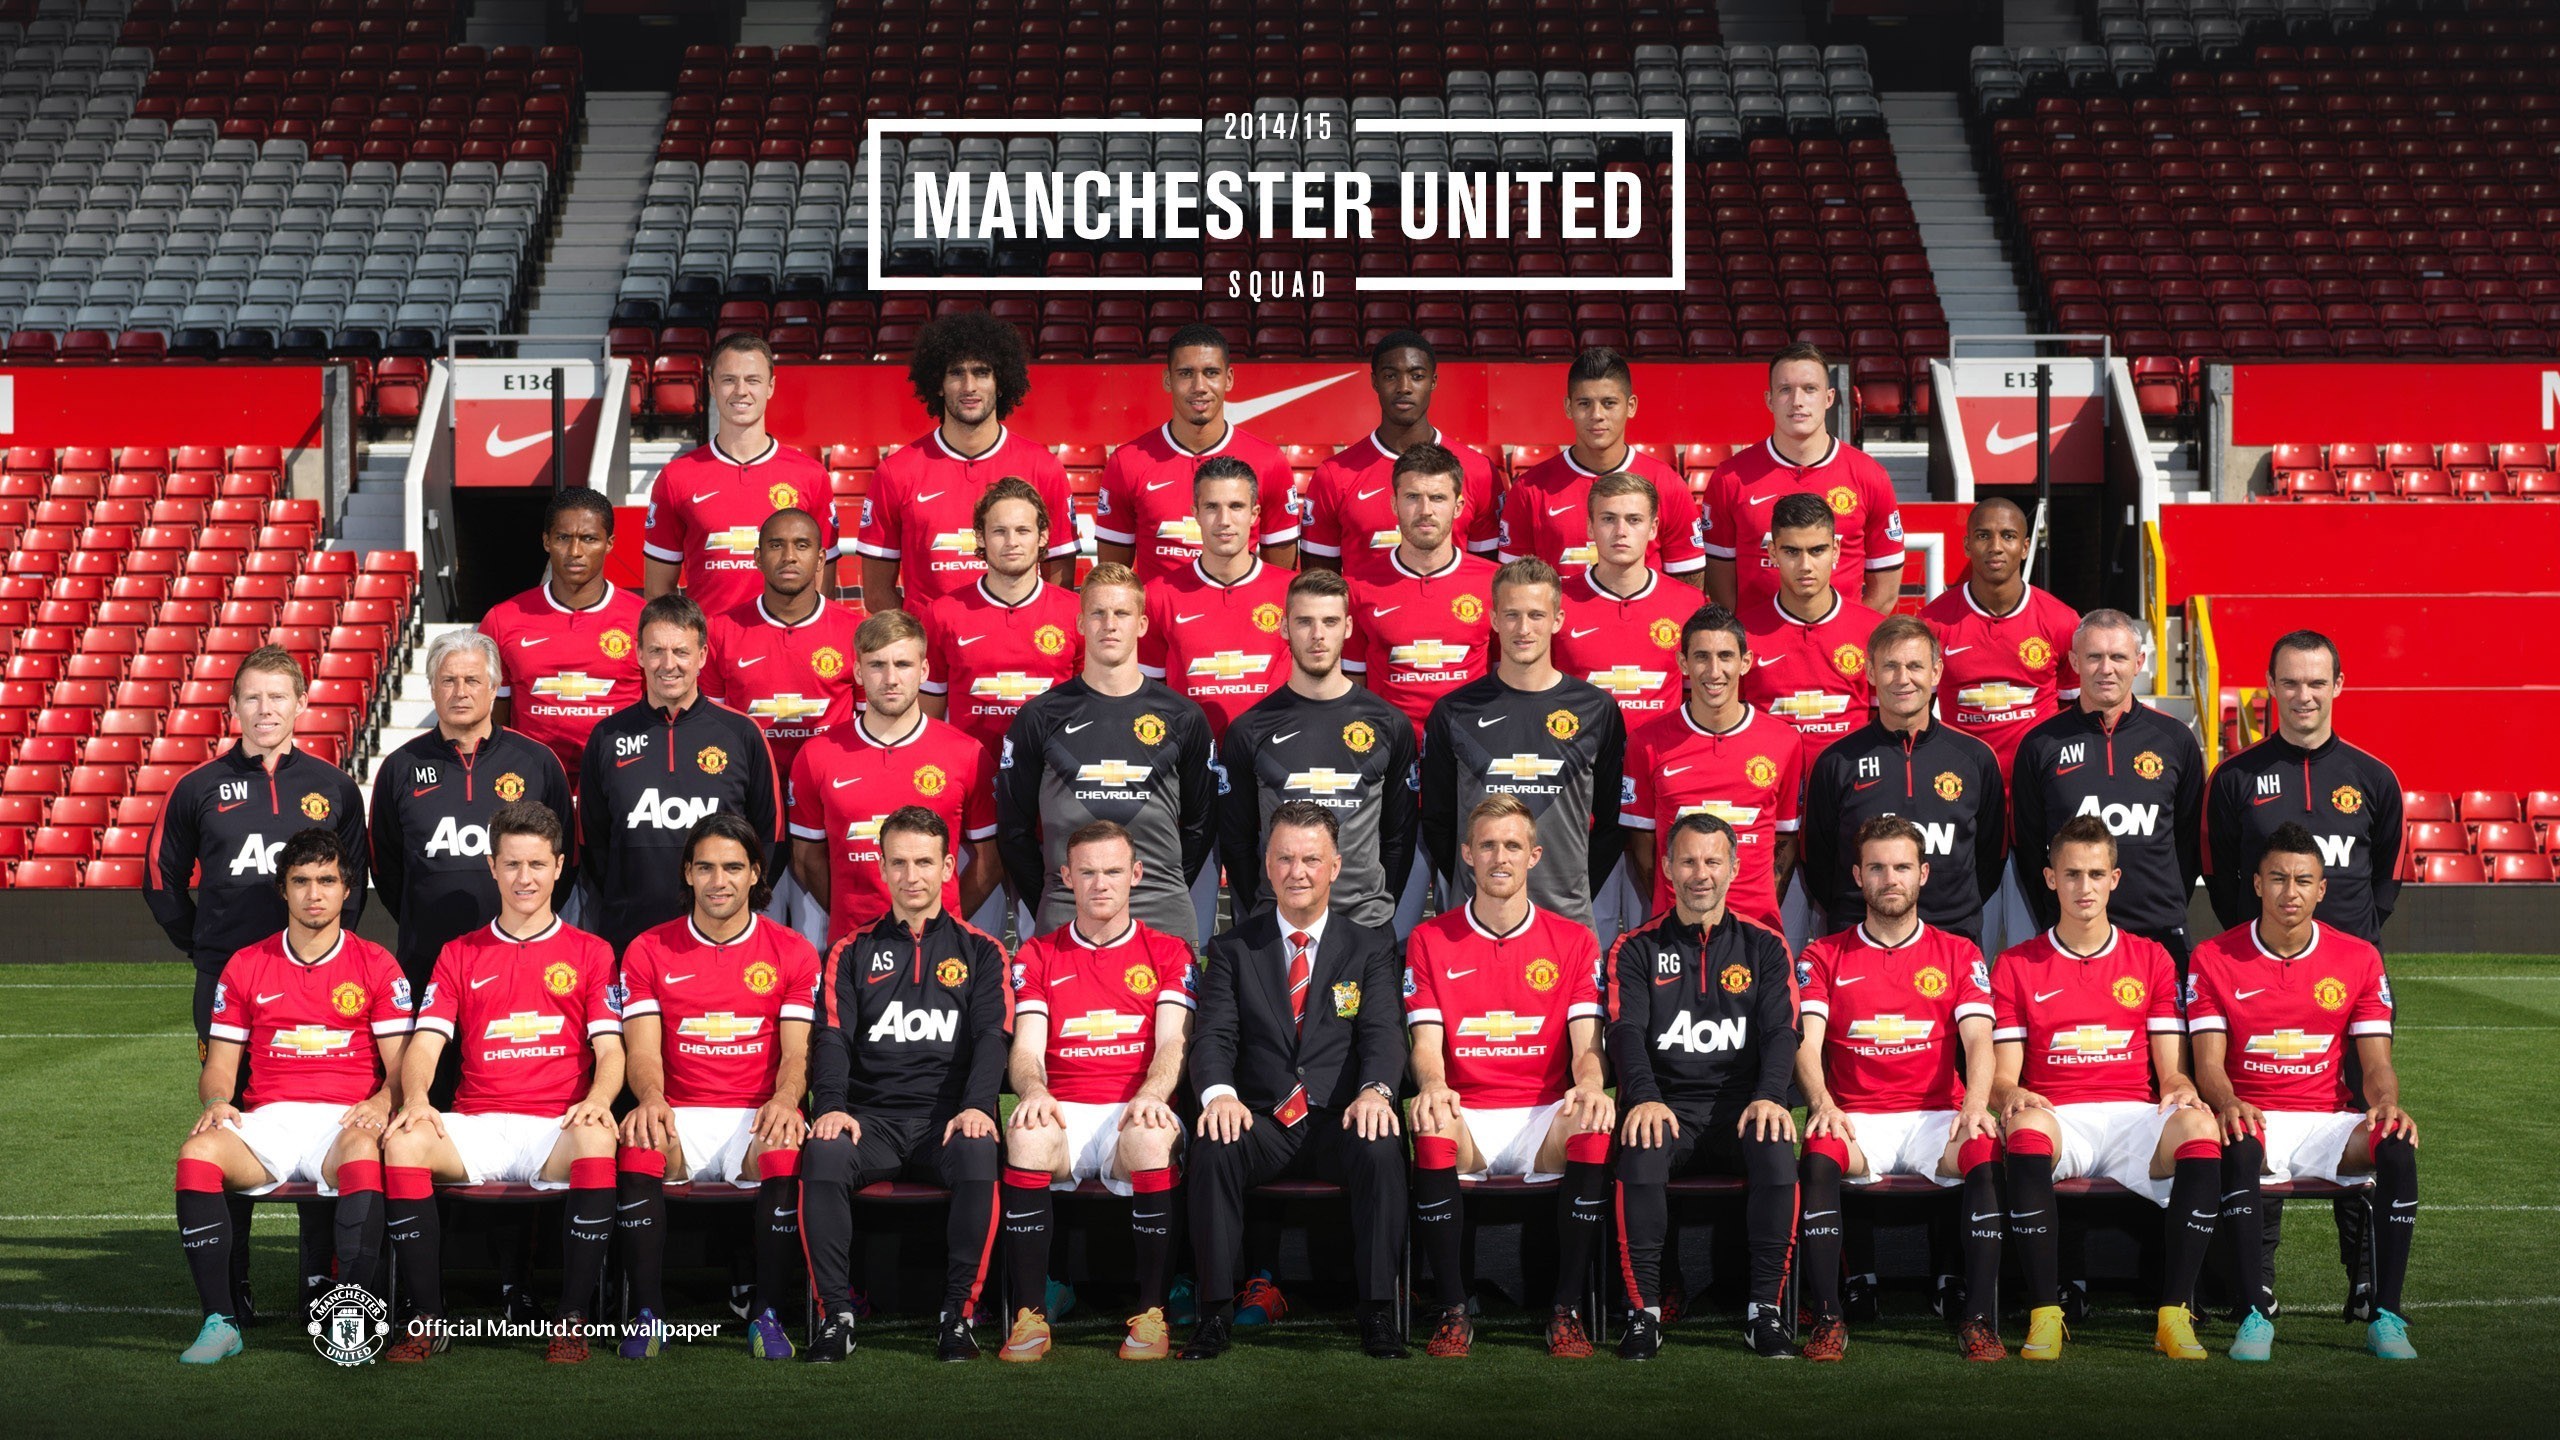 hinh nen manchester united 16 - wallpaper free download